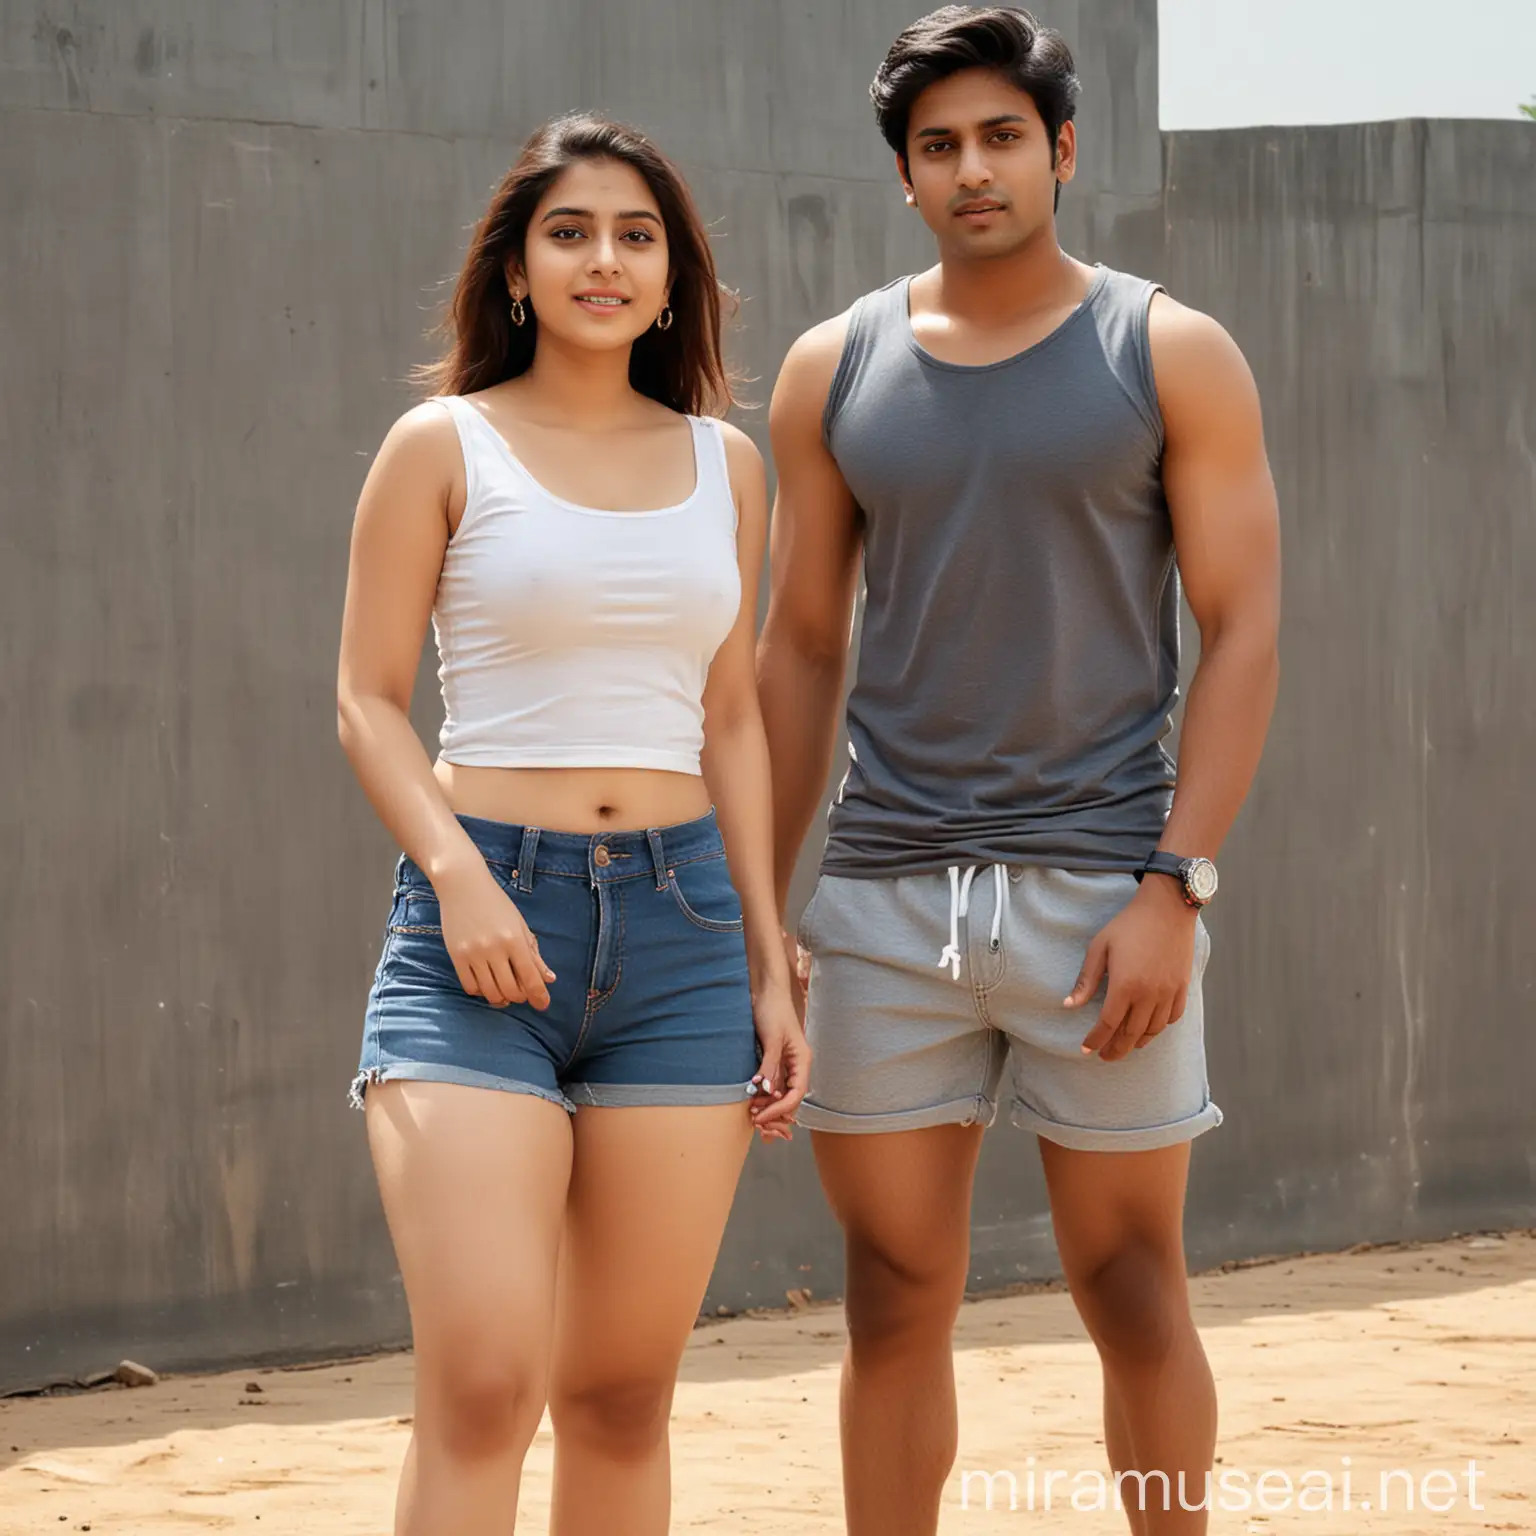 Young Indian Actress Seductively Posing with Boyfriend